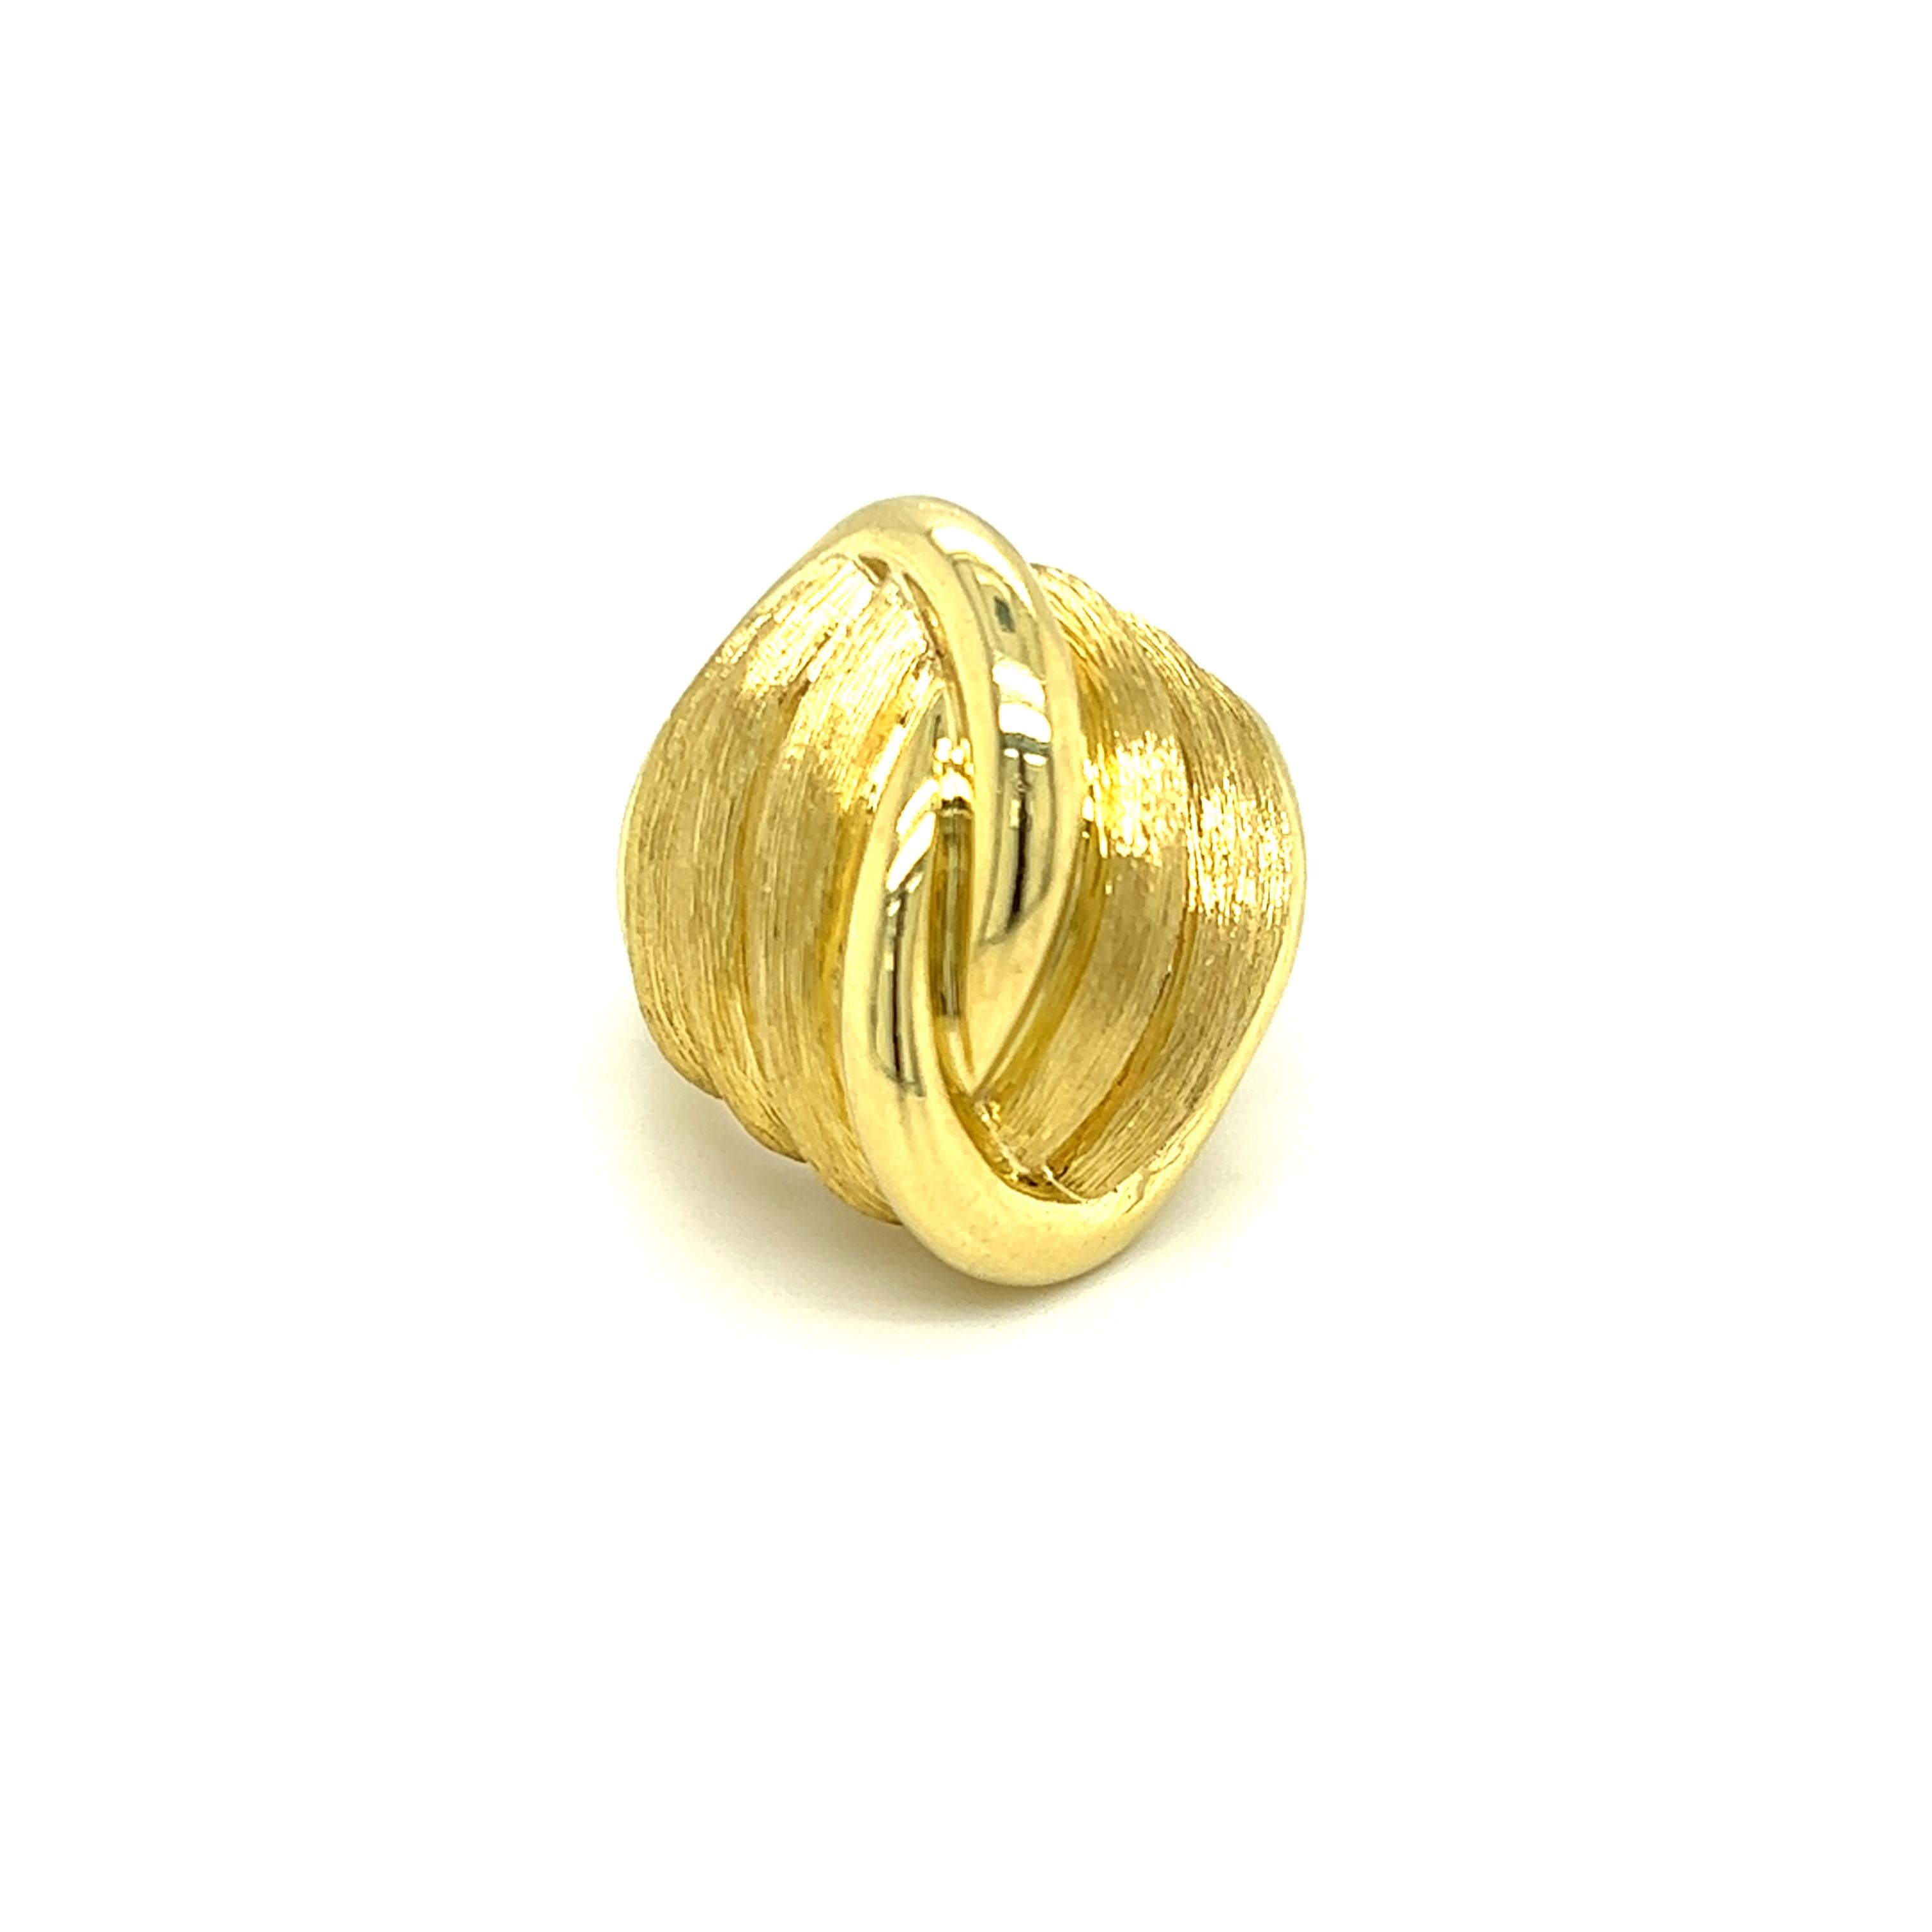 This one of a kind Henry Dunay Textured Knot Cocktail Ring is a wearable work of art crafted with 18k yellow gold. A modern statement ring with a timeless look. Its signature knot design of the American goldsmith & jewelry designer Henry Dunay